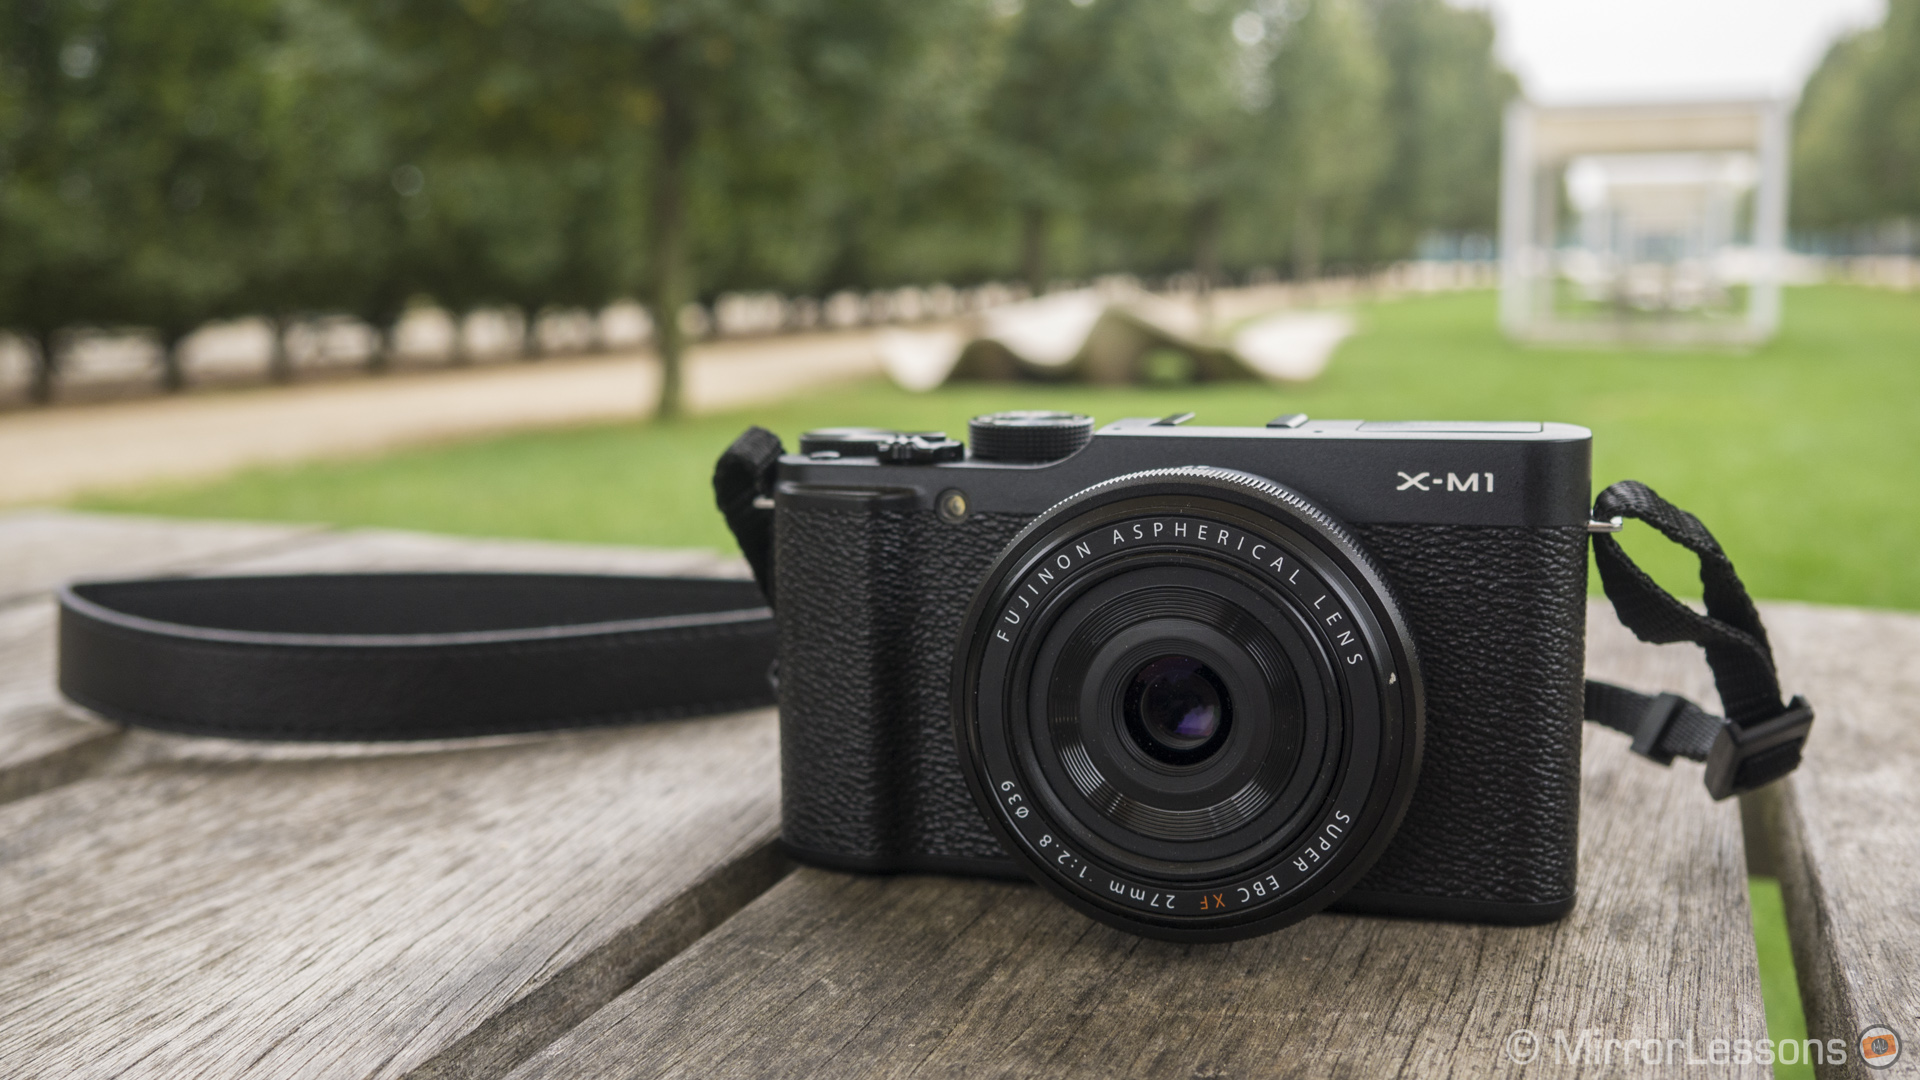 When Low-End Doesn't Mean Low Quality: A Fujifilm X-M1 Review